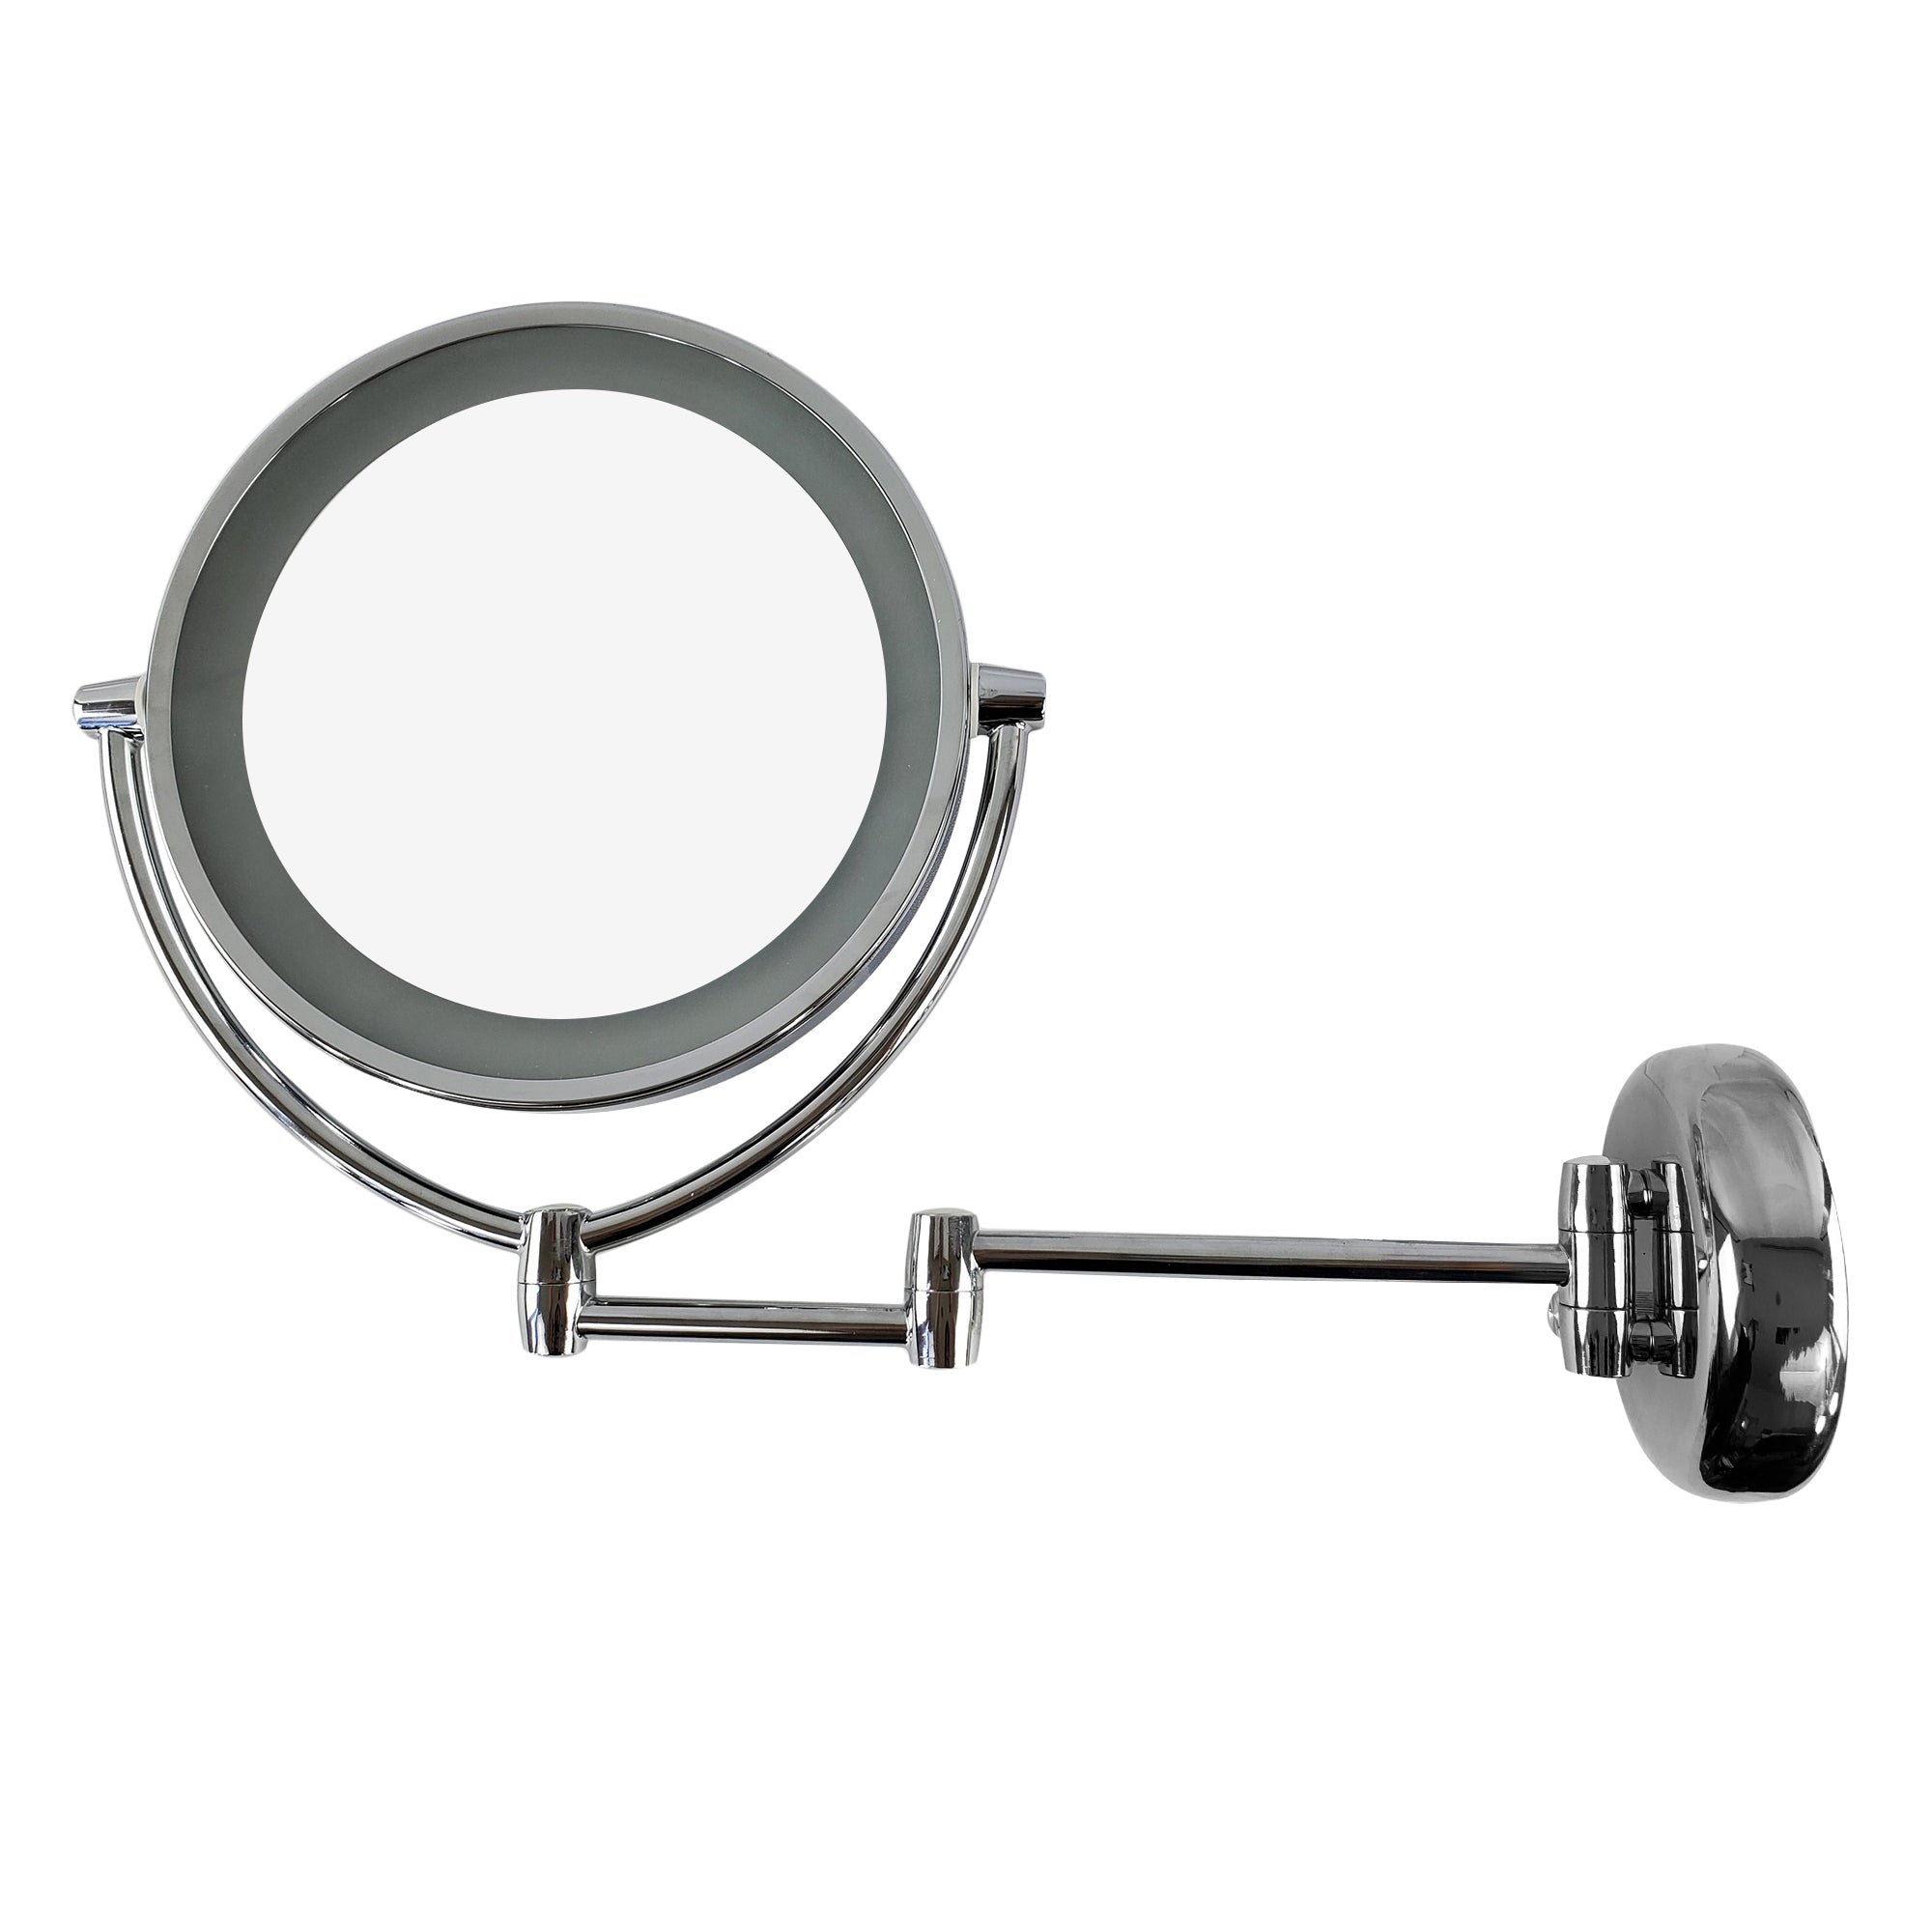 Lighted Extendable Wall Mount Mirror 7X/1X Magnification (M950)